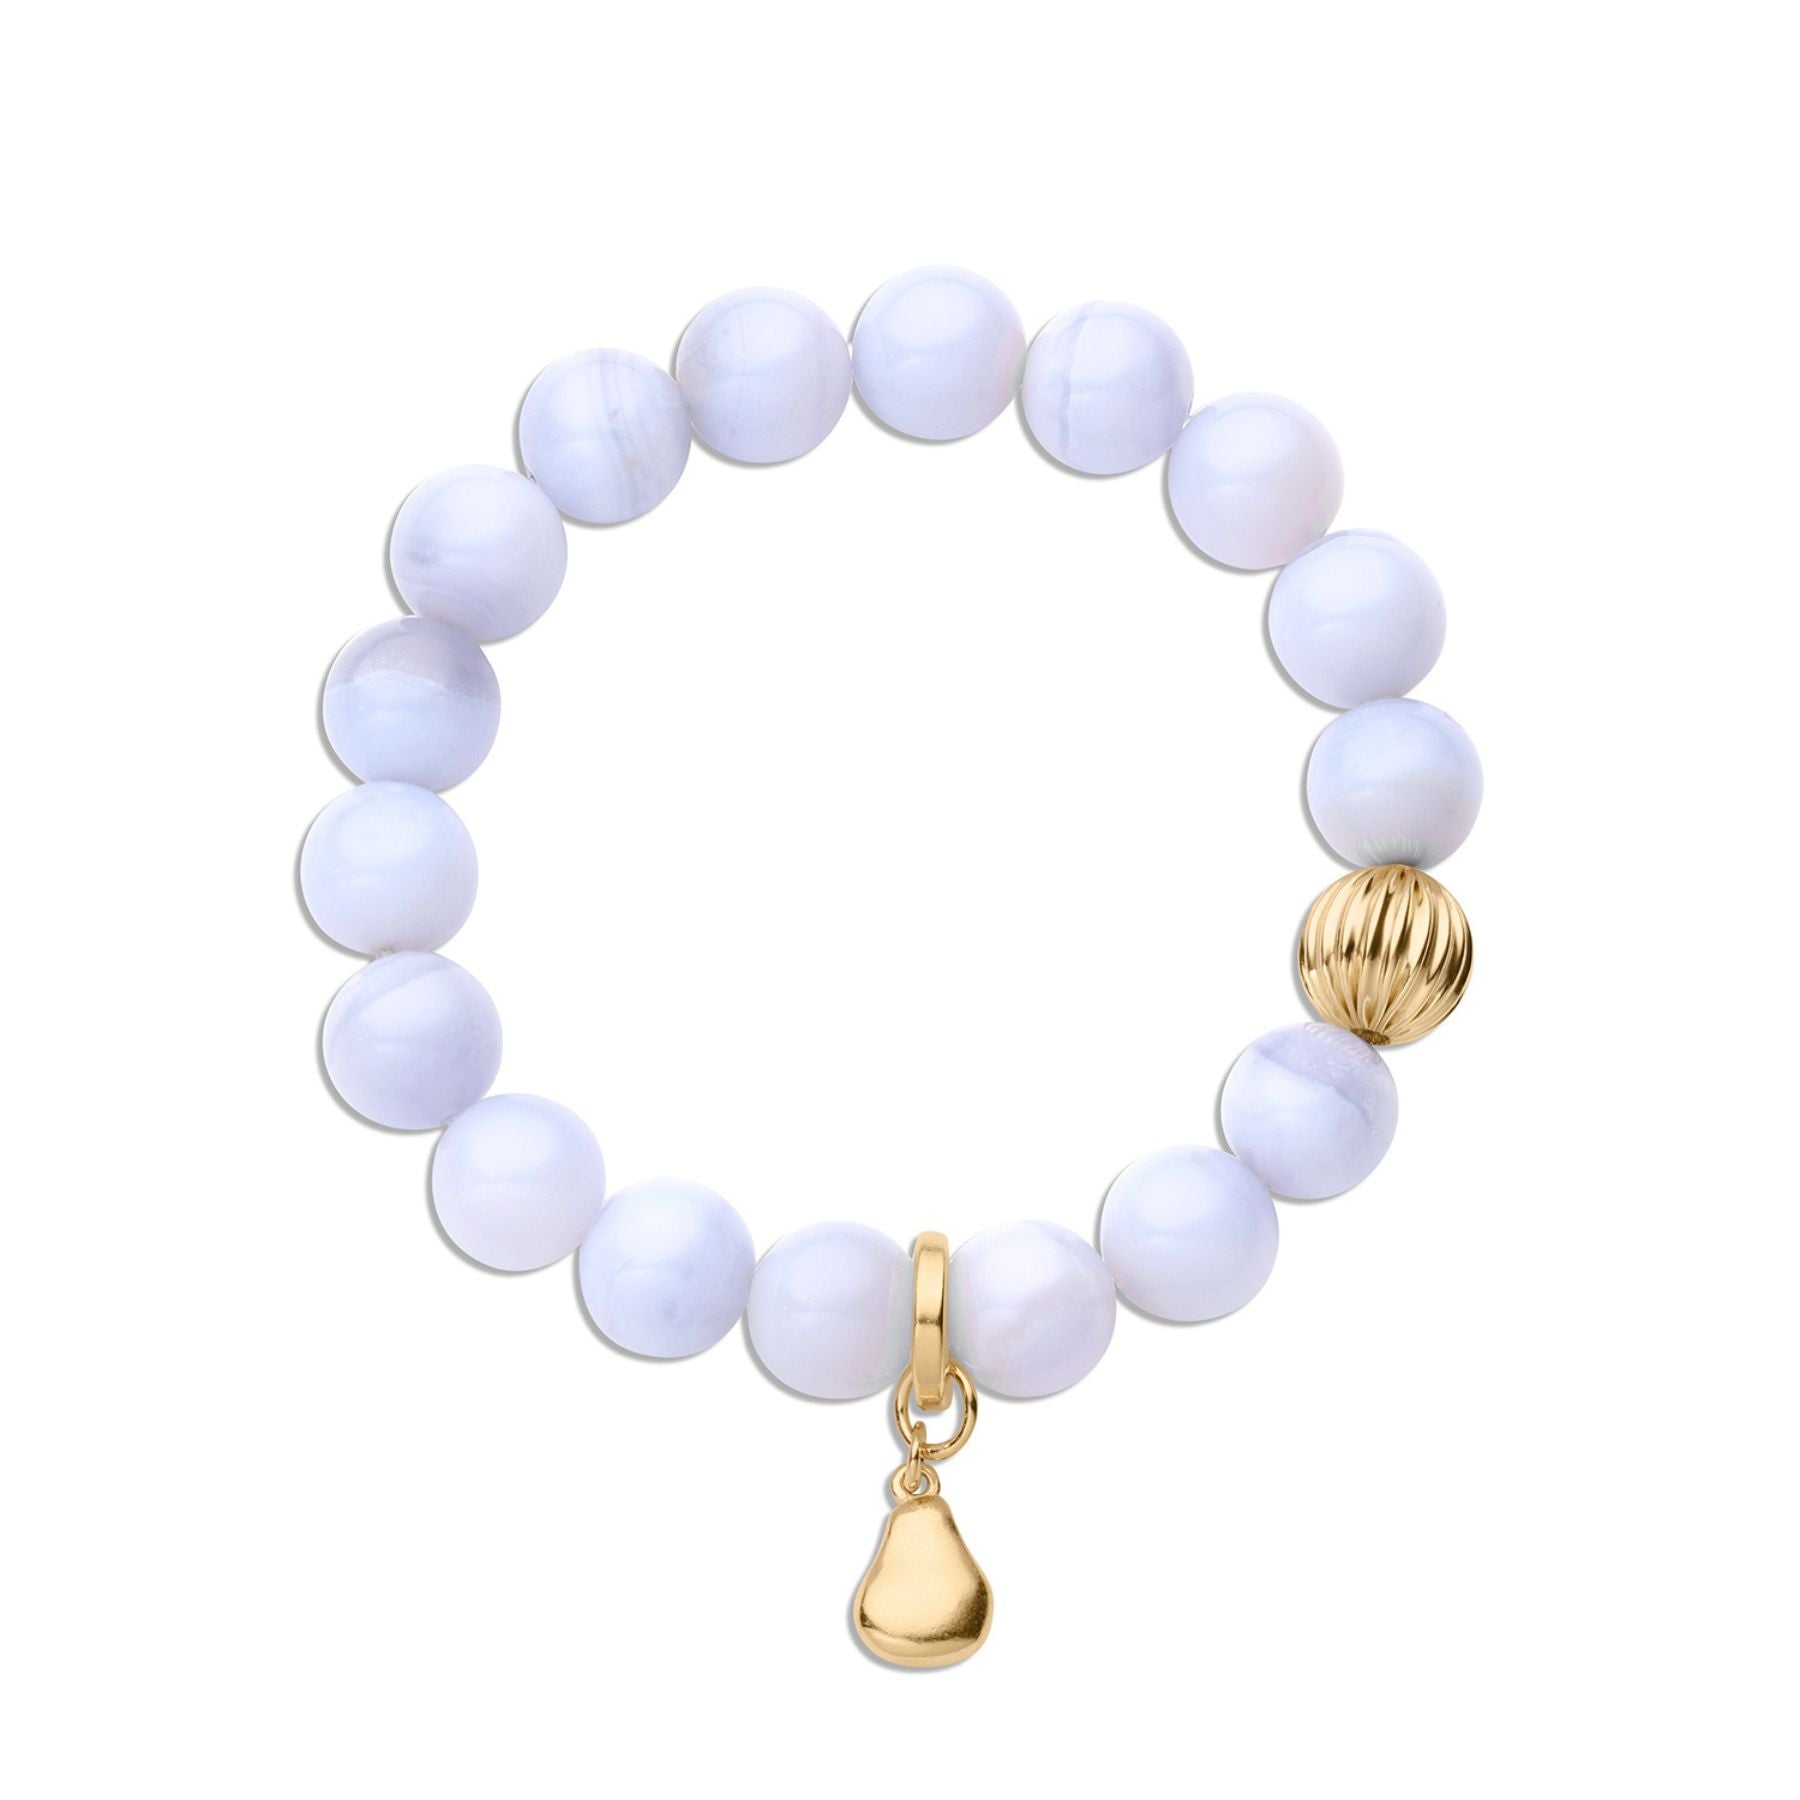 Beaded bracelet with blue agate crystals, gold corrugated bead, and gold pear charm.